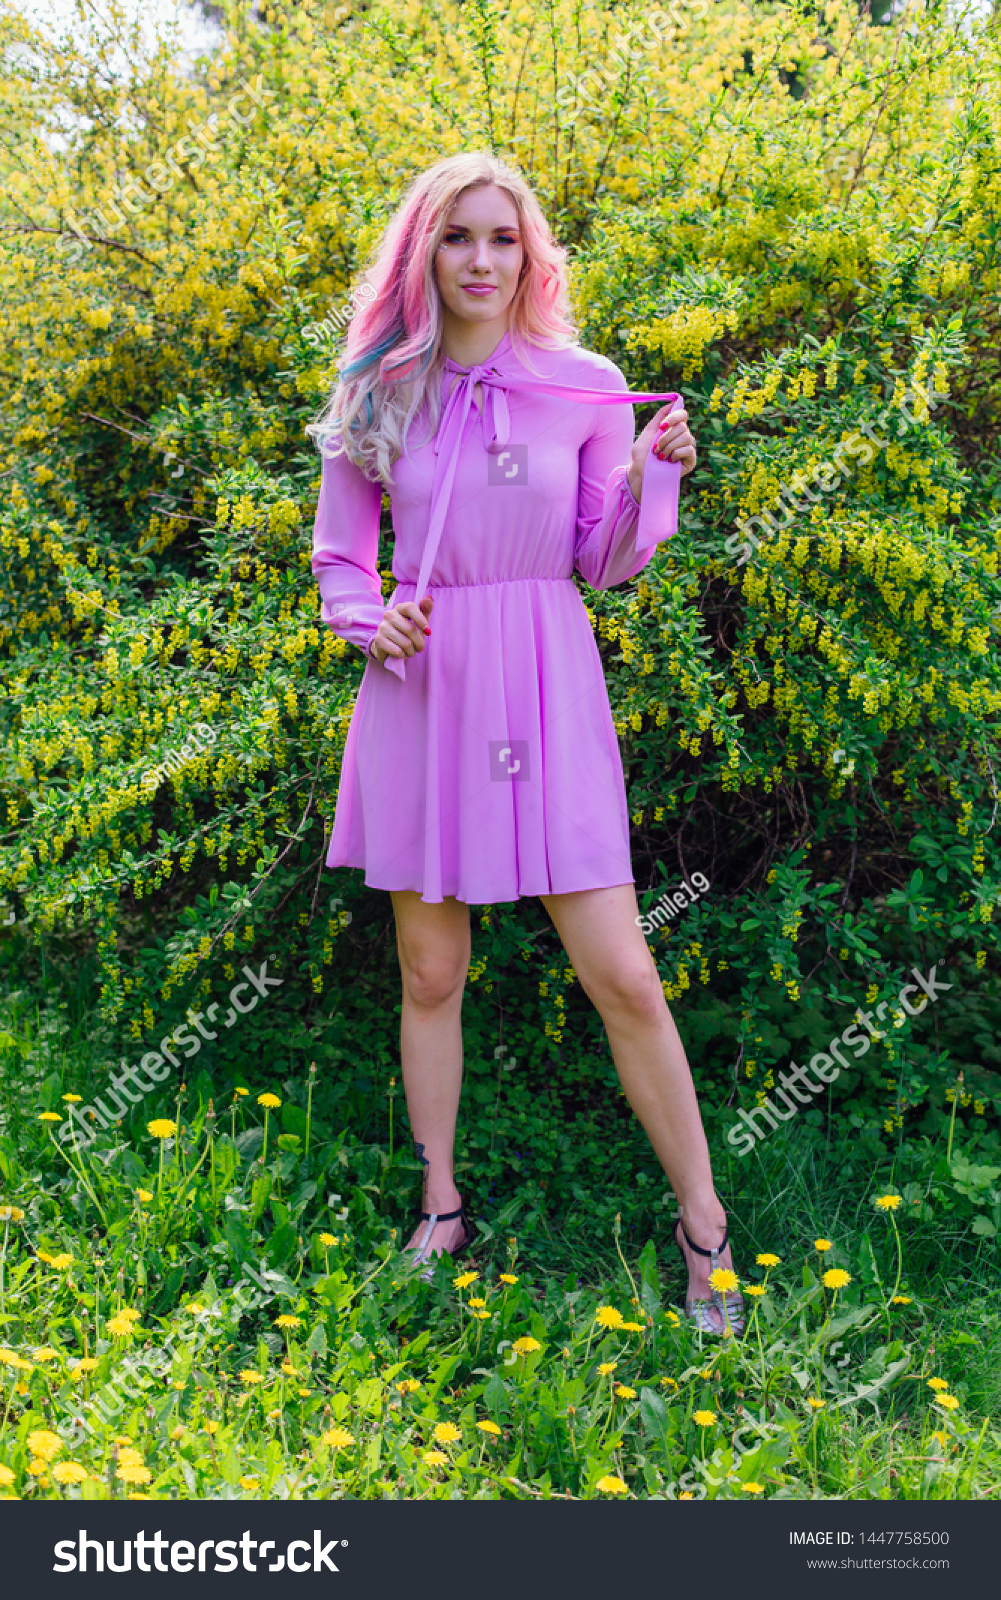 Beautiful fashion model girl with colorful dyed hair and perfect makeup and hairstyle standig next to blooming barberry bush with yellow flowers #1447758500